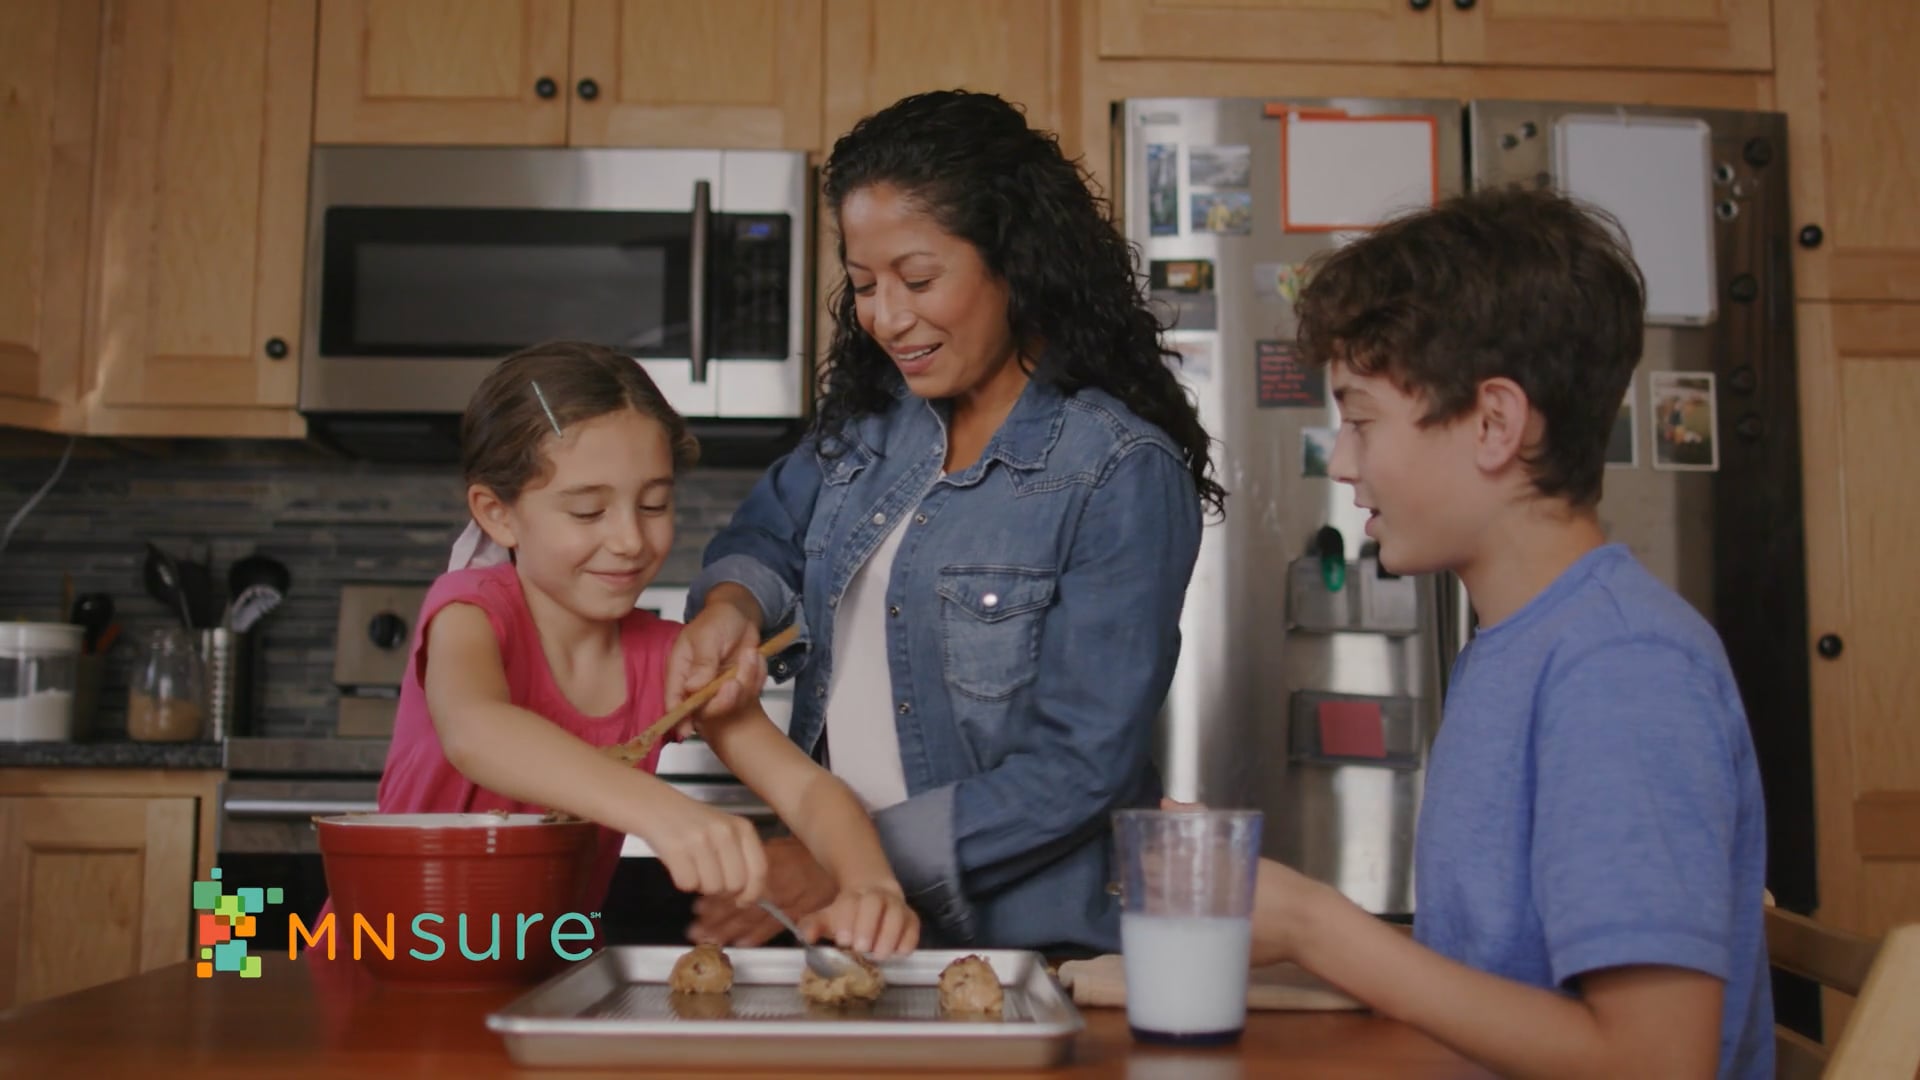 MNsure: 30 Second Commercial Spot – Nora